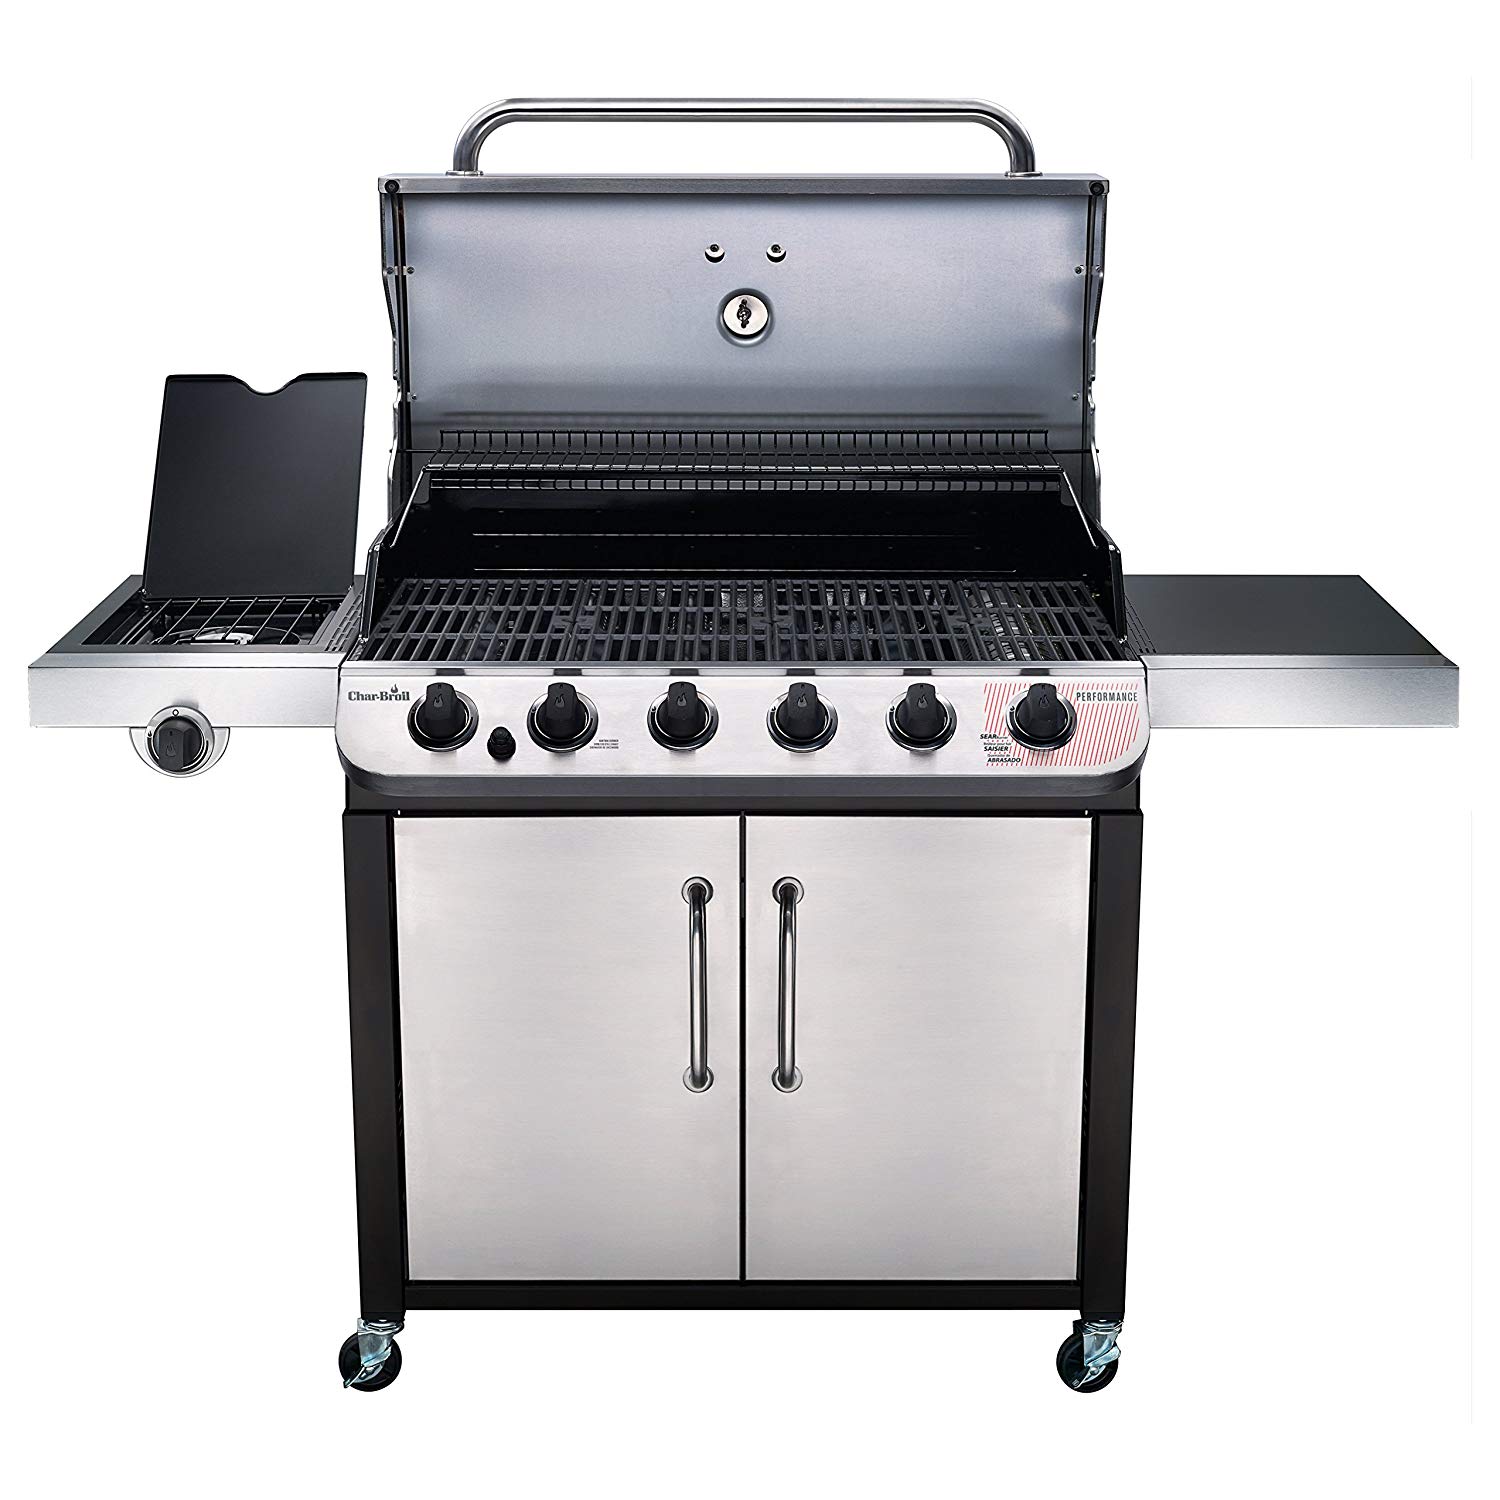 Best Barbecue Grill - Buy Electric, Charcoal and Propane Grills At Best Prices